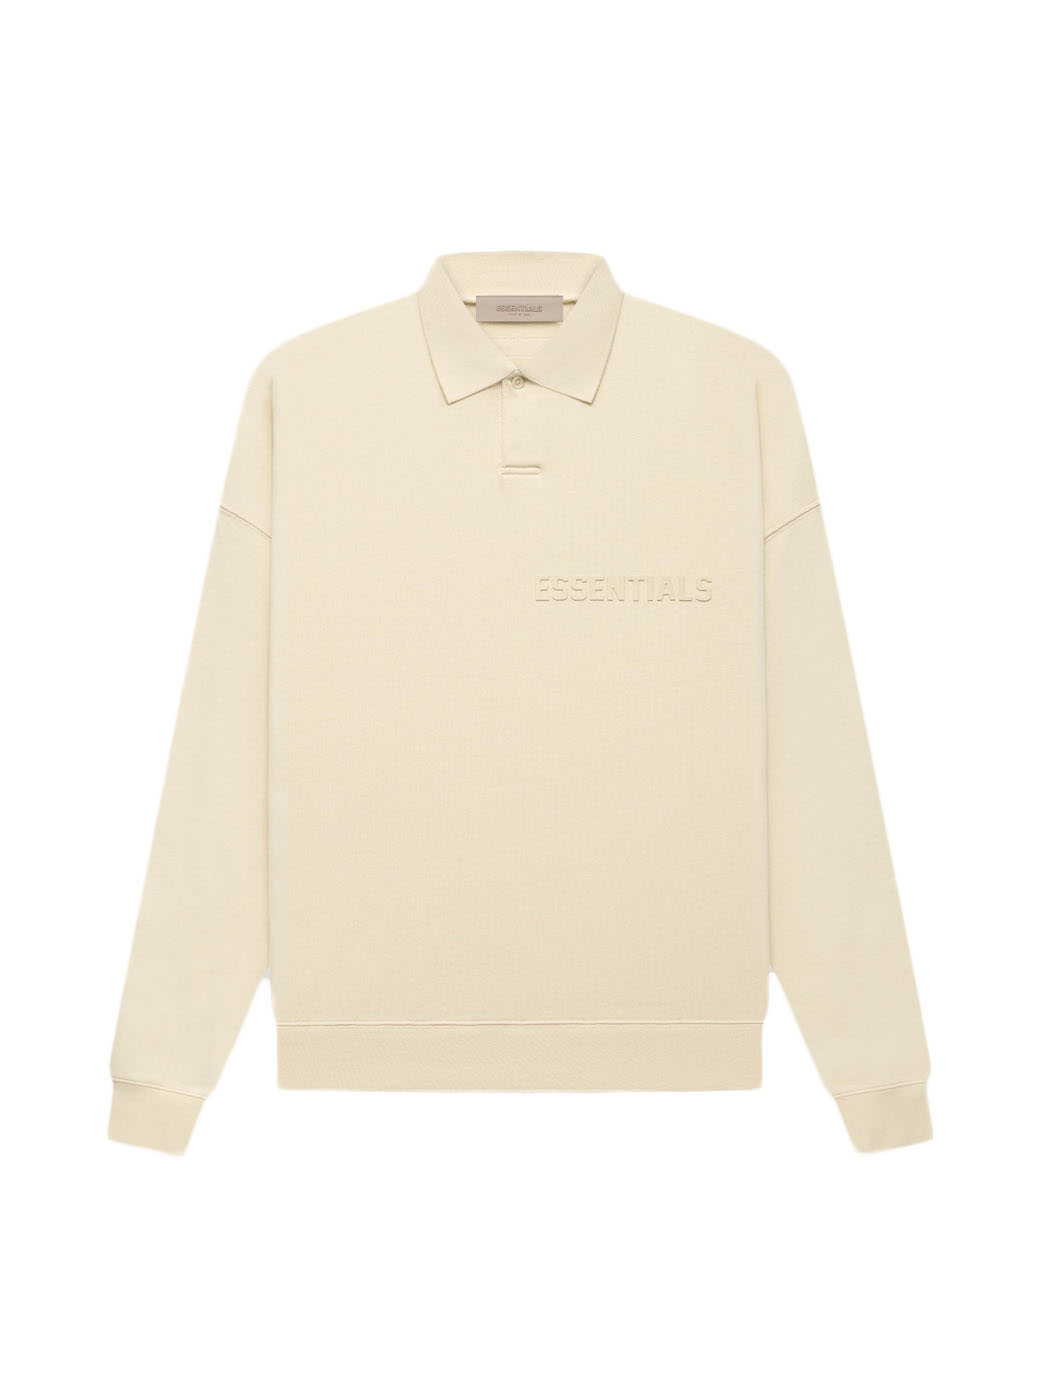 Fear of God Essentials L/S Polo Wheat Men's - SS22 - US